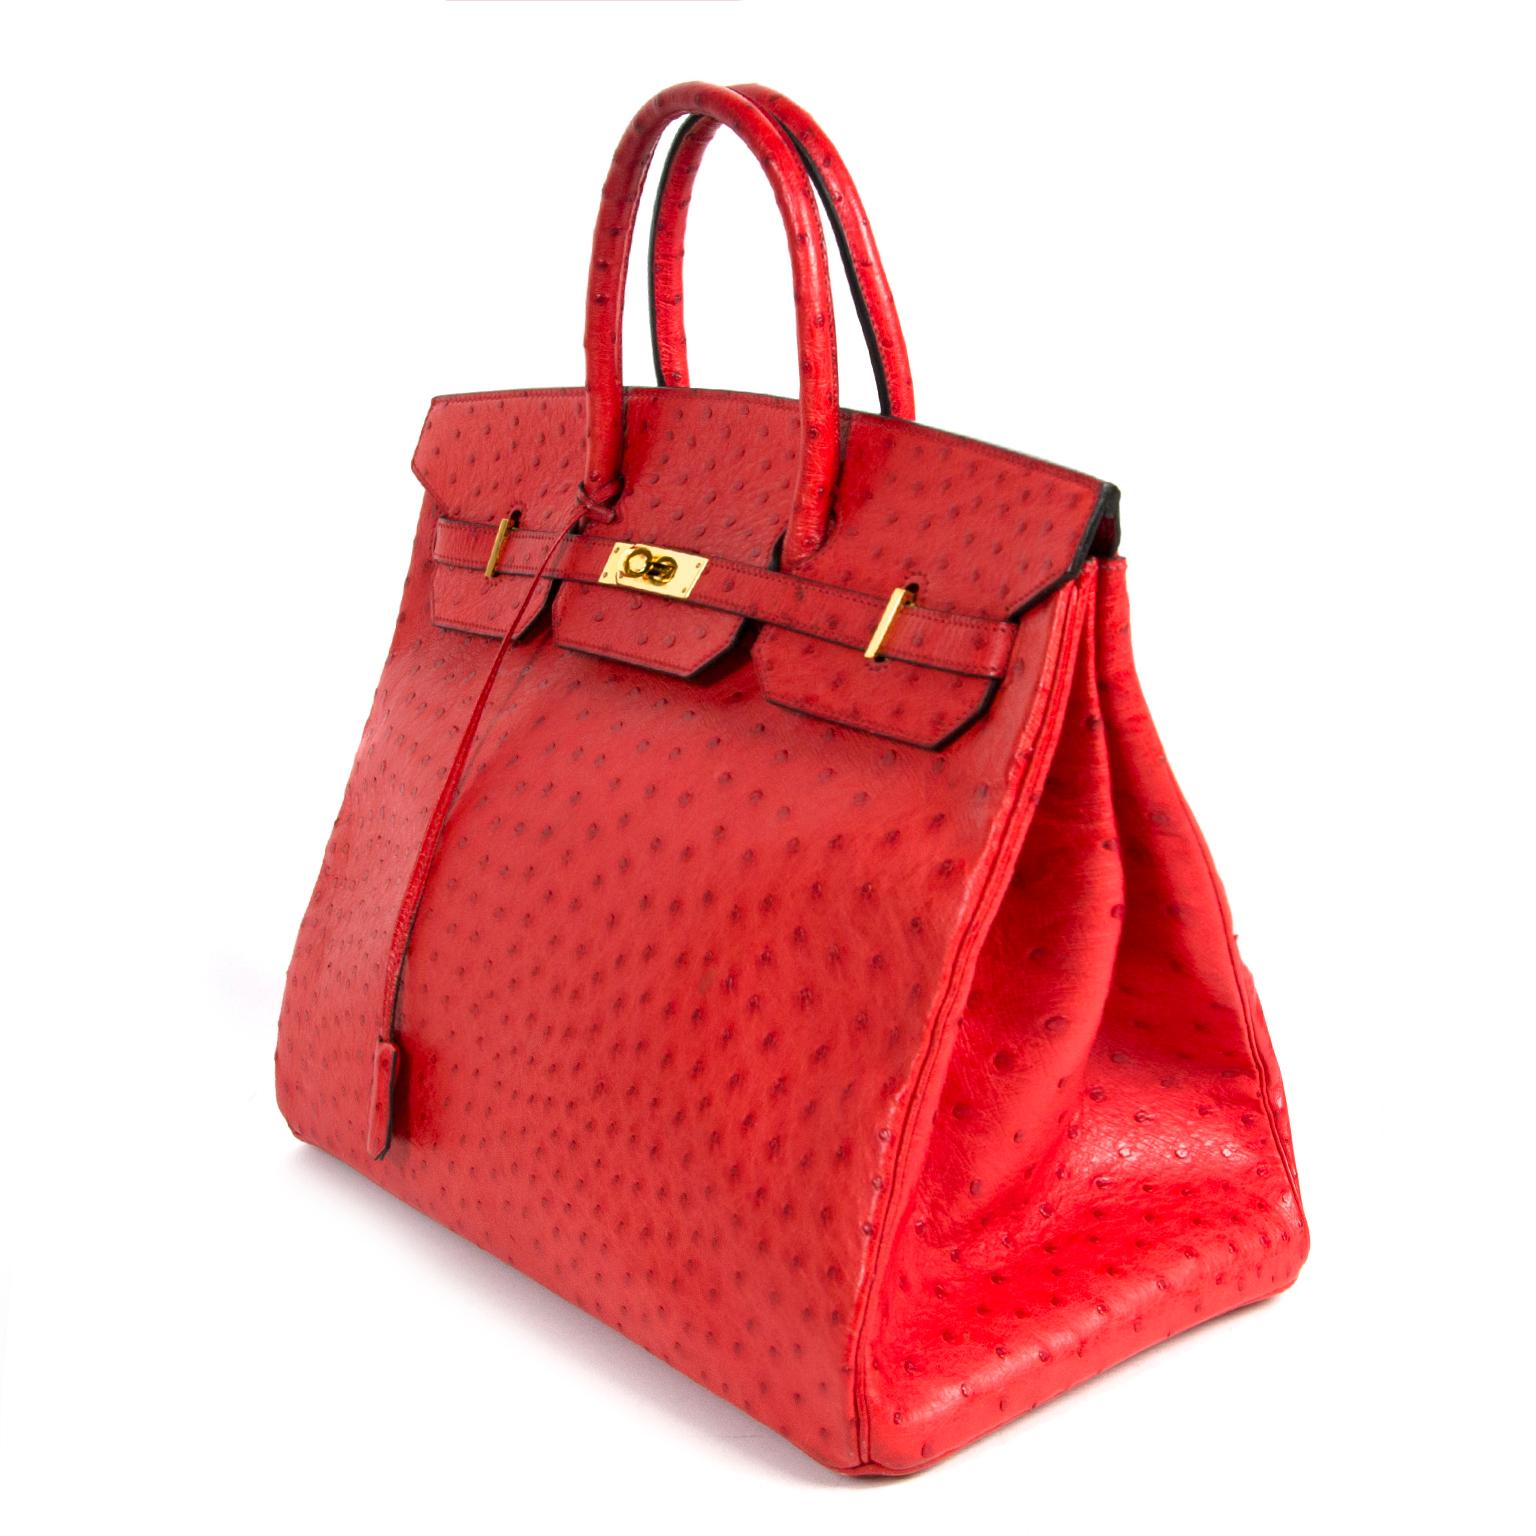 Hermès Birkin 40 Ostrich Bougainvillea PHW/ This absolutely fabulous bag is made from ostrich leather. Made with extreme craftmanship. This Hermès Birkin bag is a beautiful piece with a deep Bougainvillea red color. The bag features gold toned